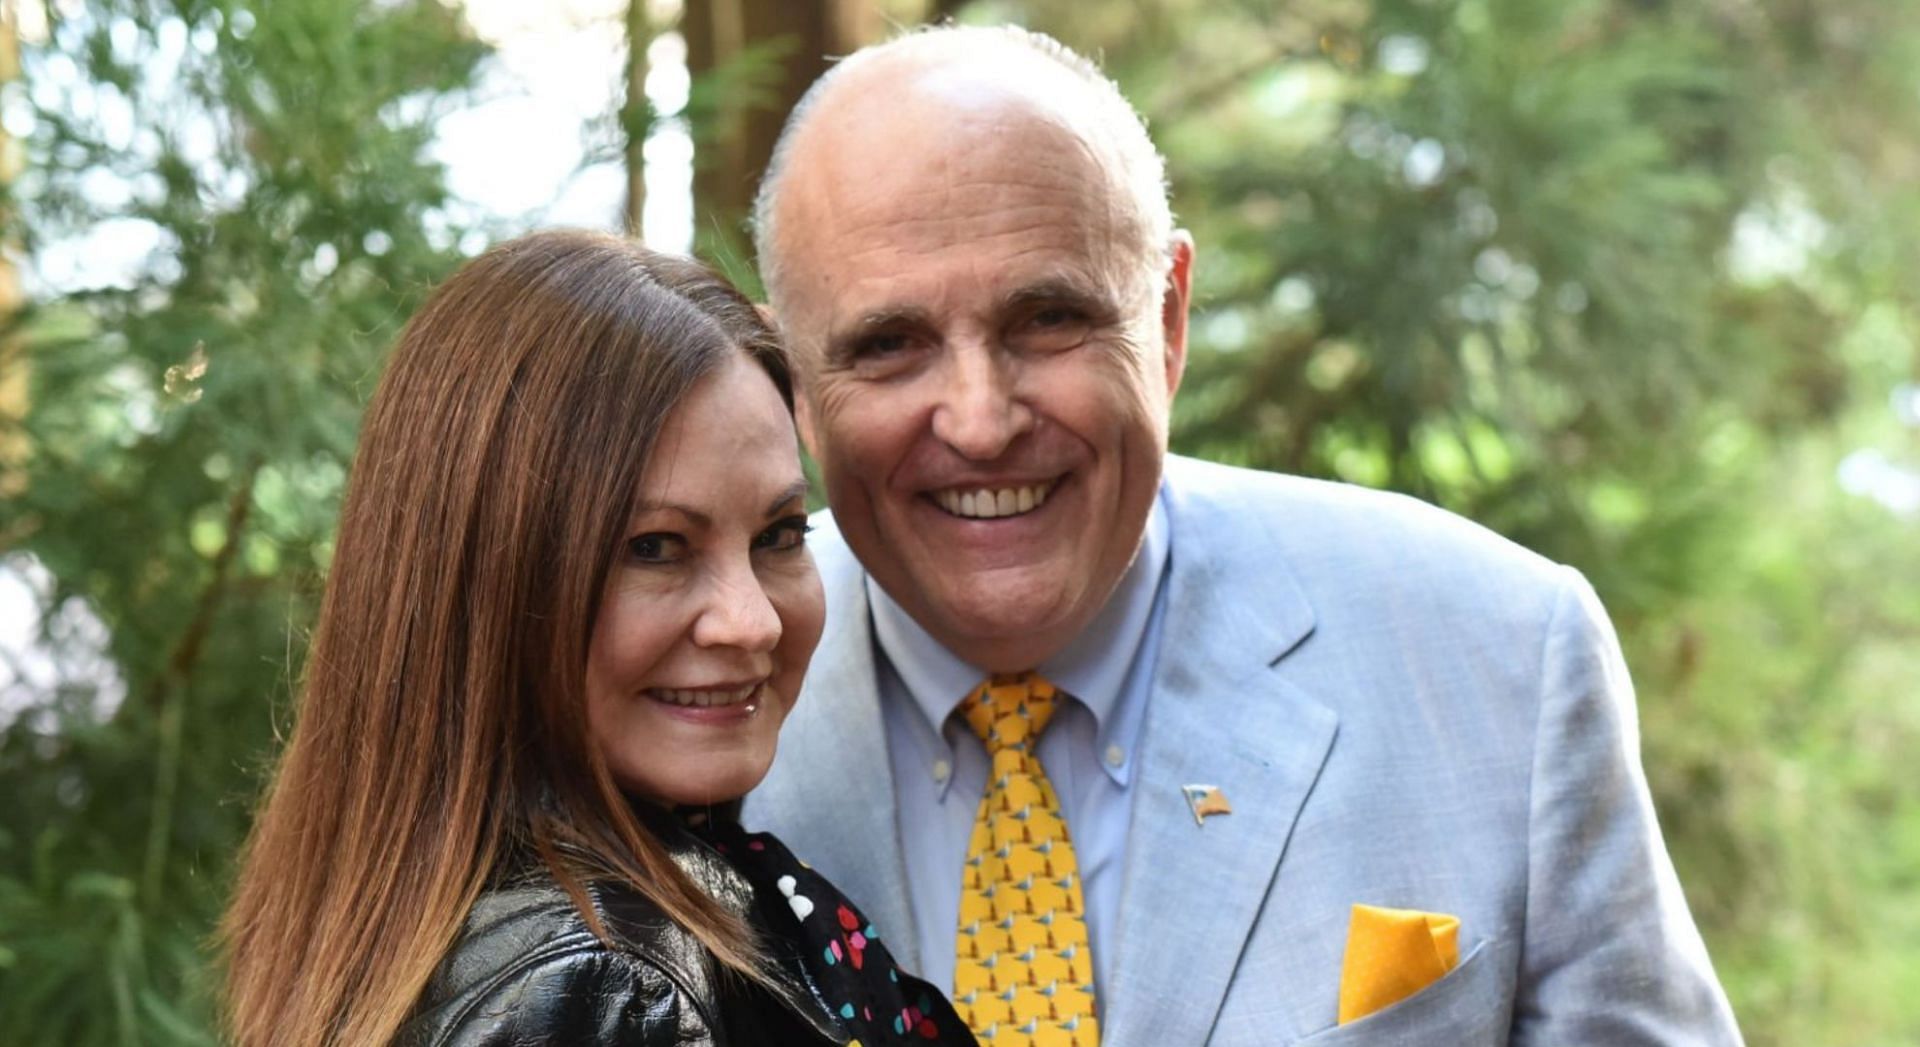 Judith Giuliani has reportedly sued her ex-husband Rudy Giuliani over contempt of court (Image via Jared Siskin/Getty Images)